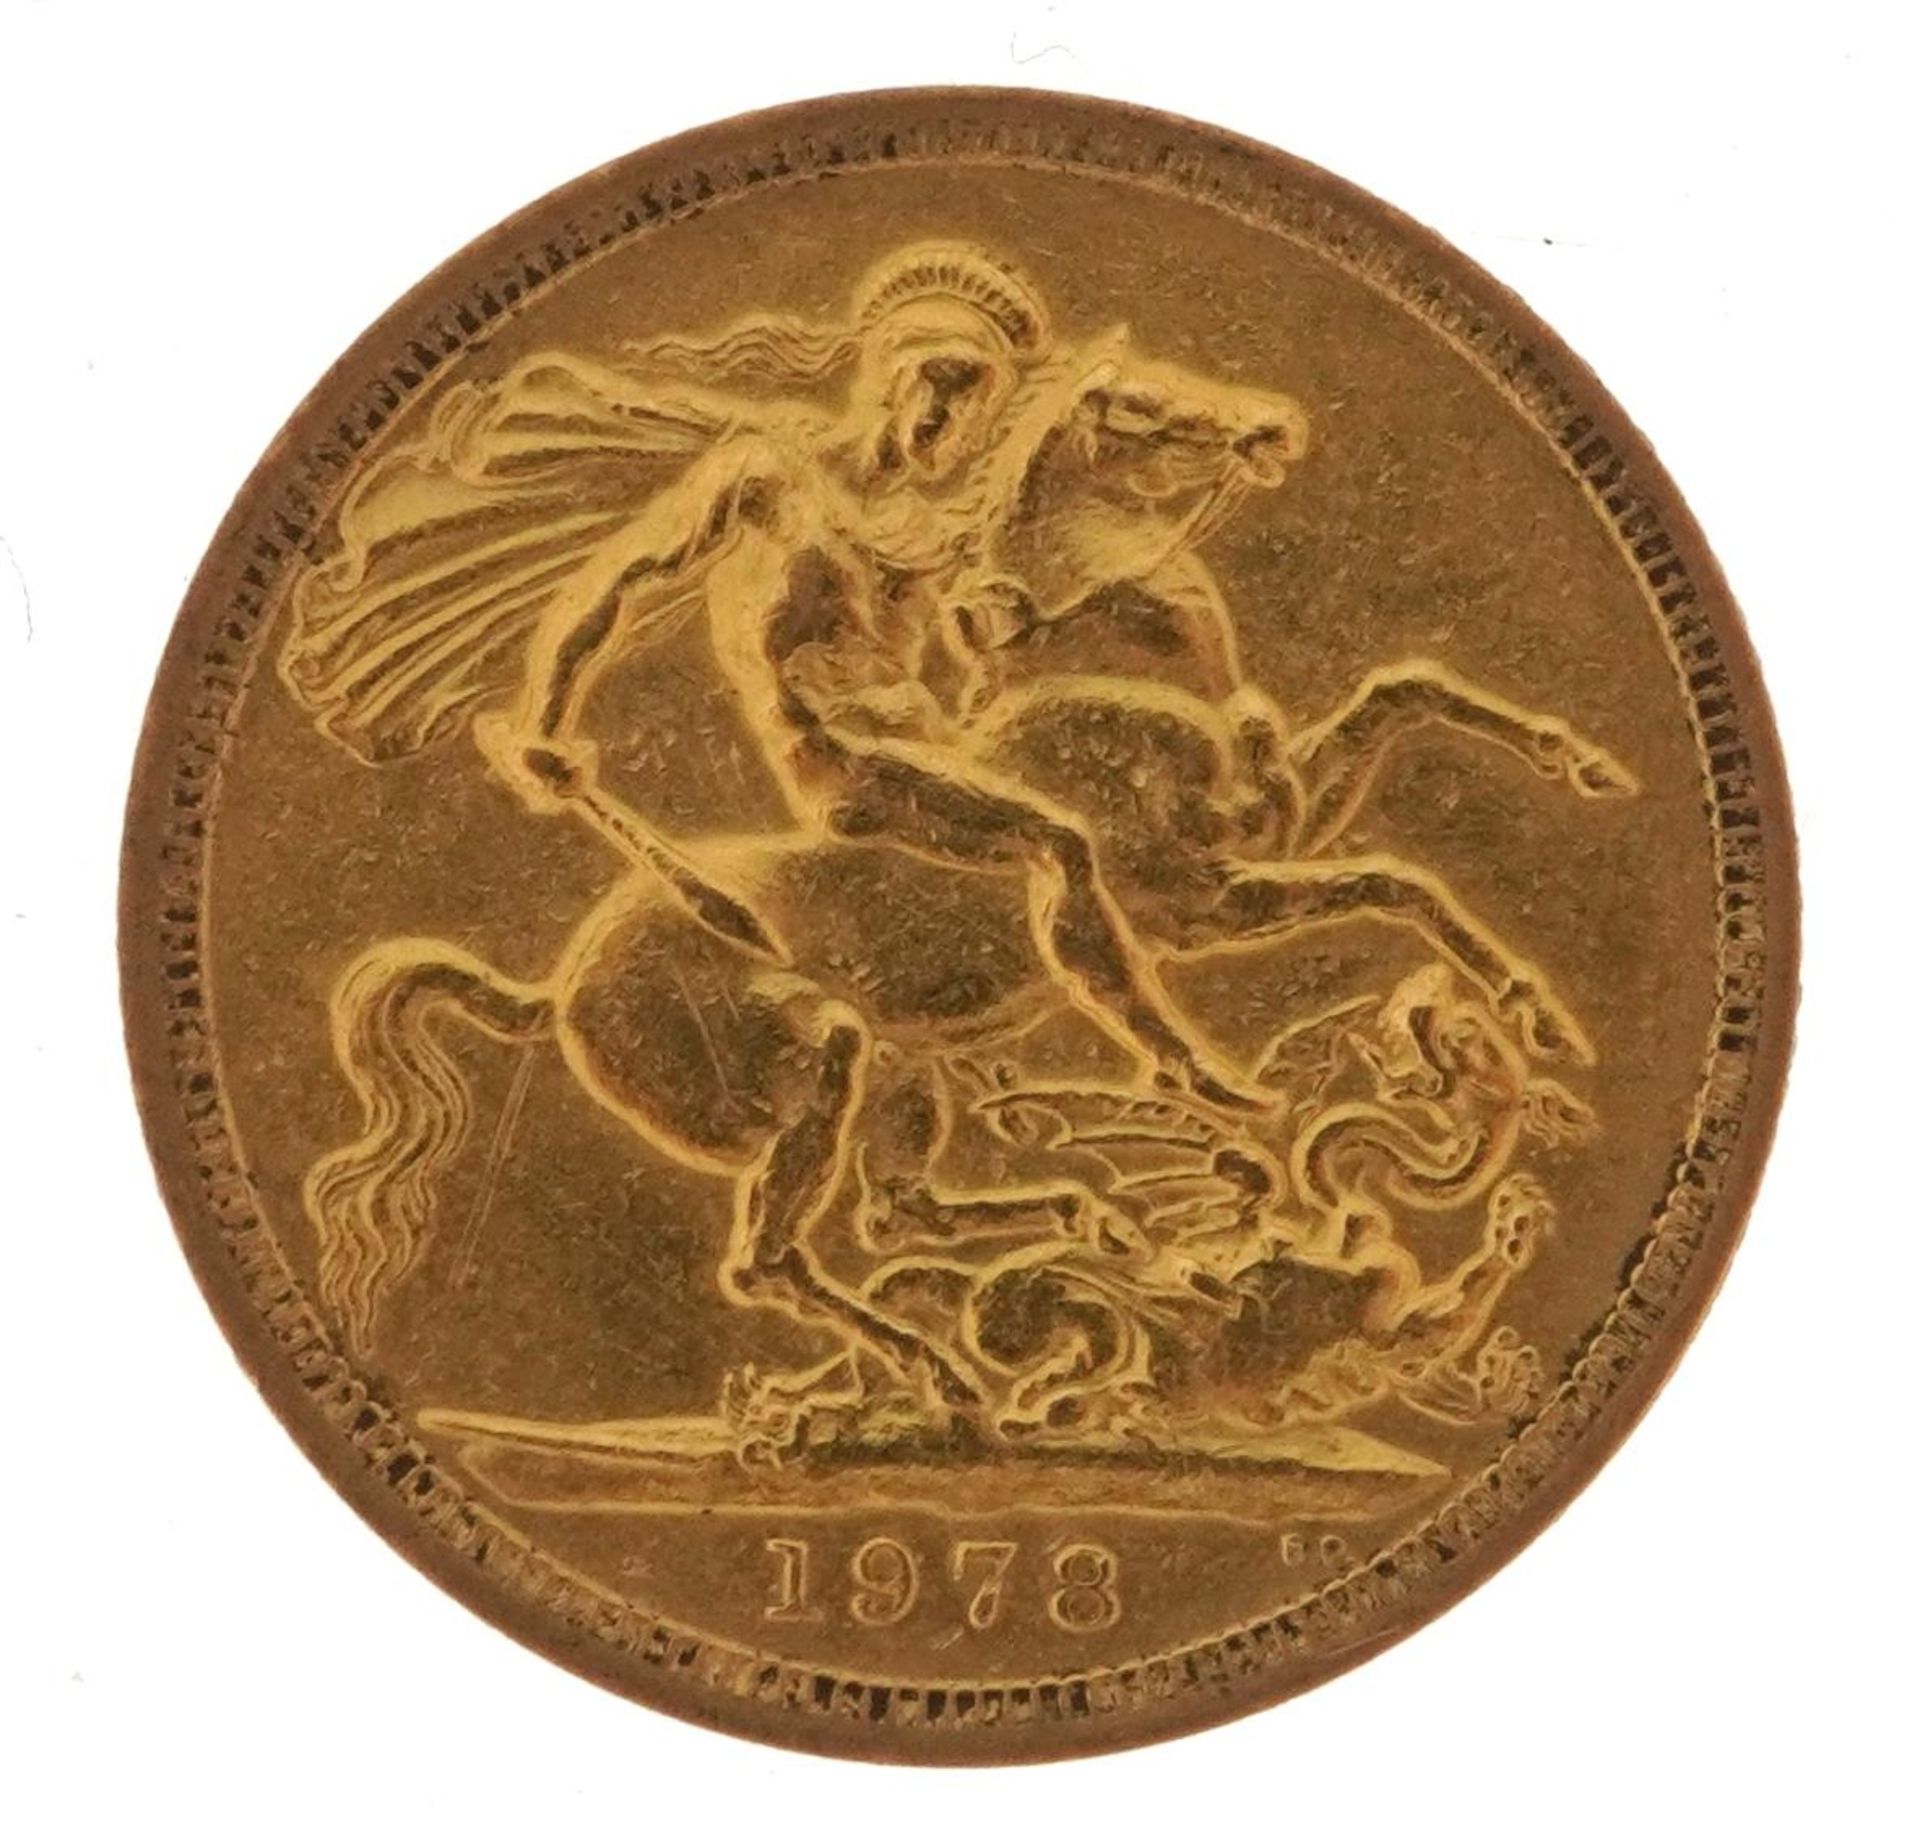 Elizabeth II 1978 gold sovereign - this lot is sold without buyer’s premium : For further